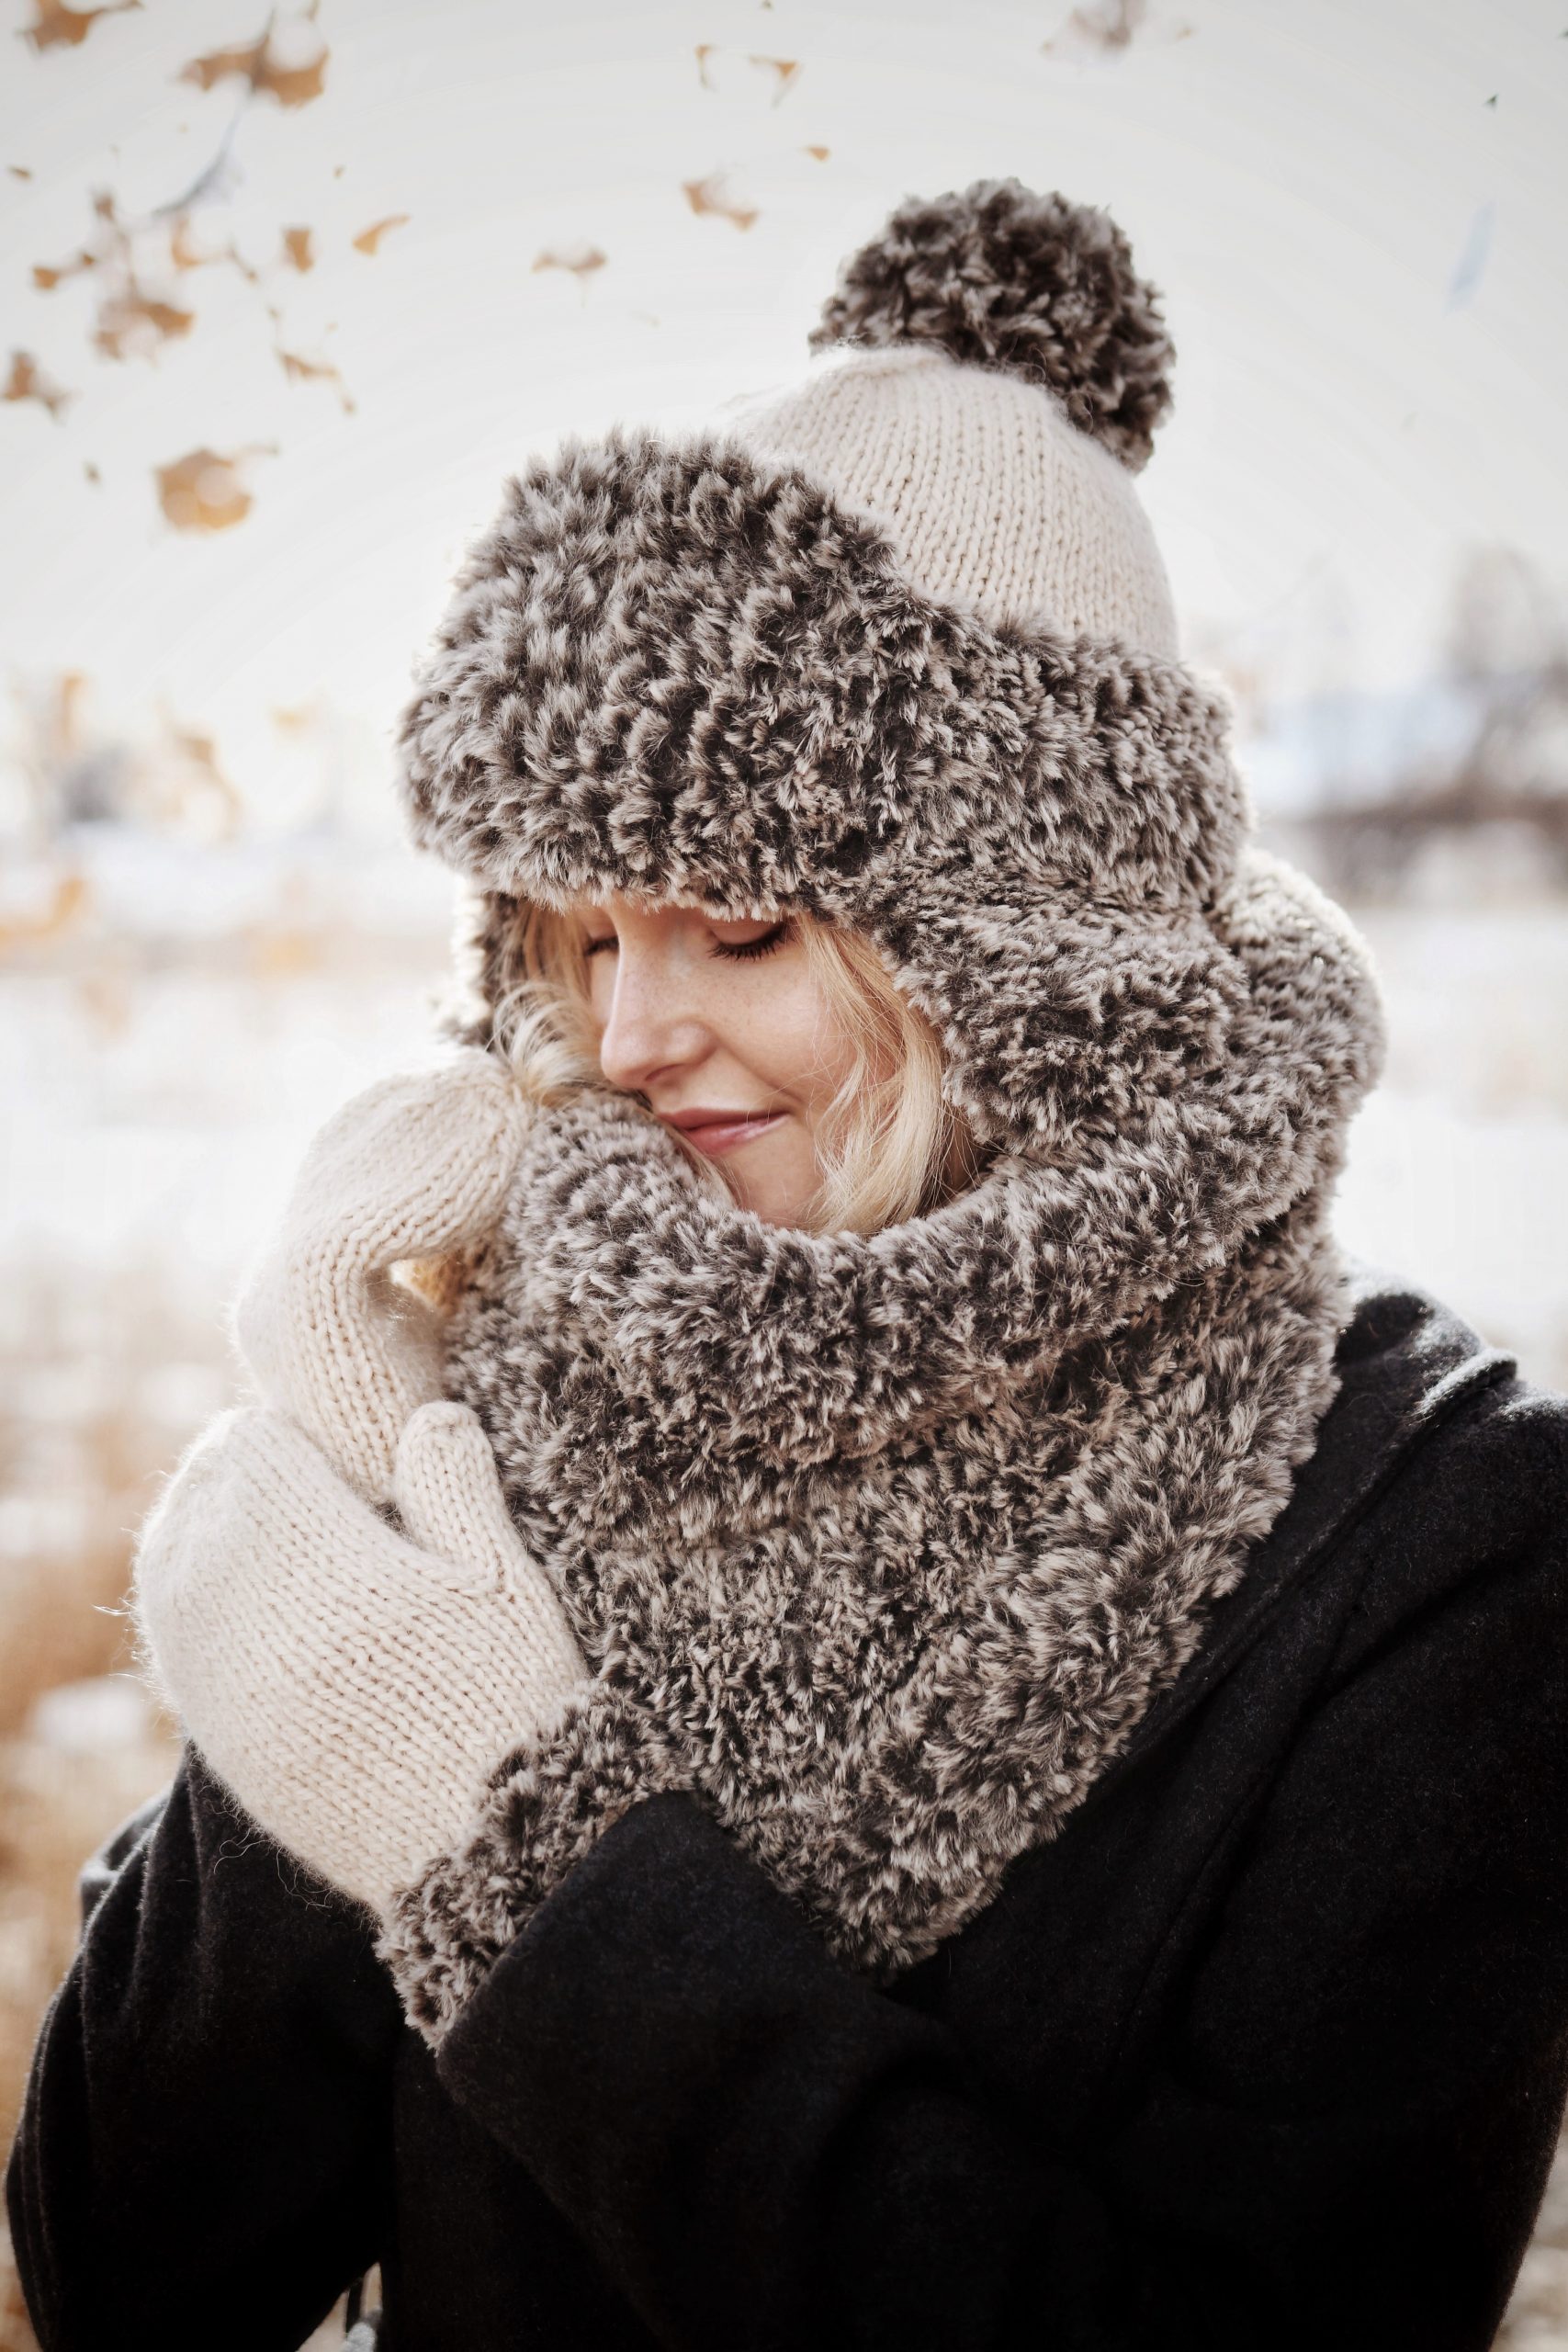 Faux Fur Knit Hat Mittens Cowl Knitting Patterns by Darling Jadore